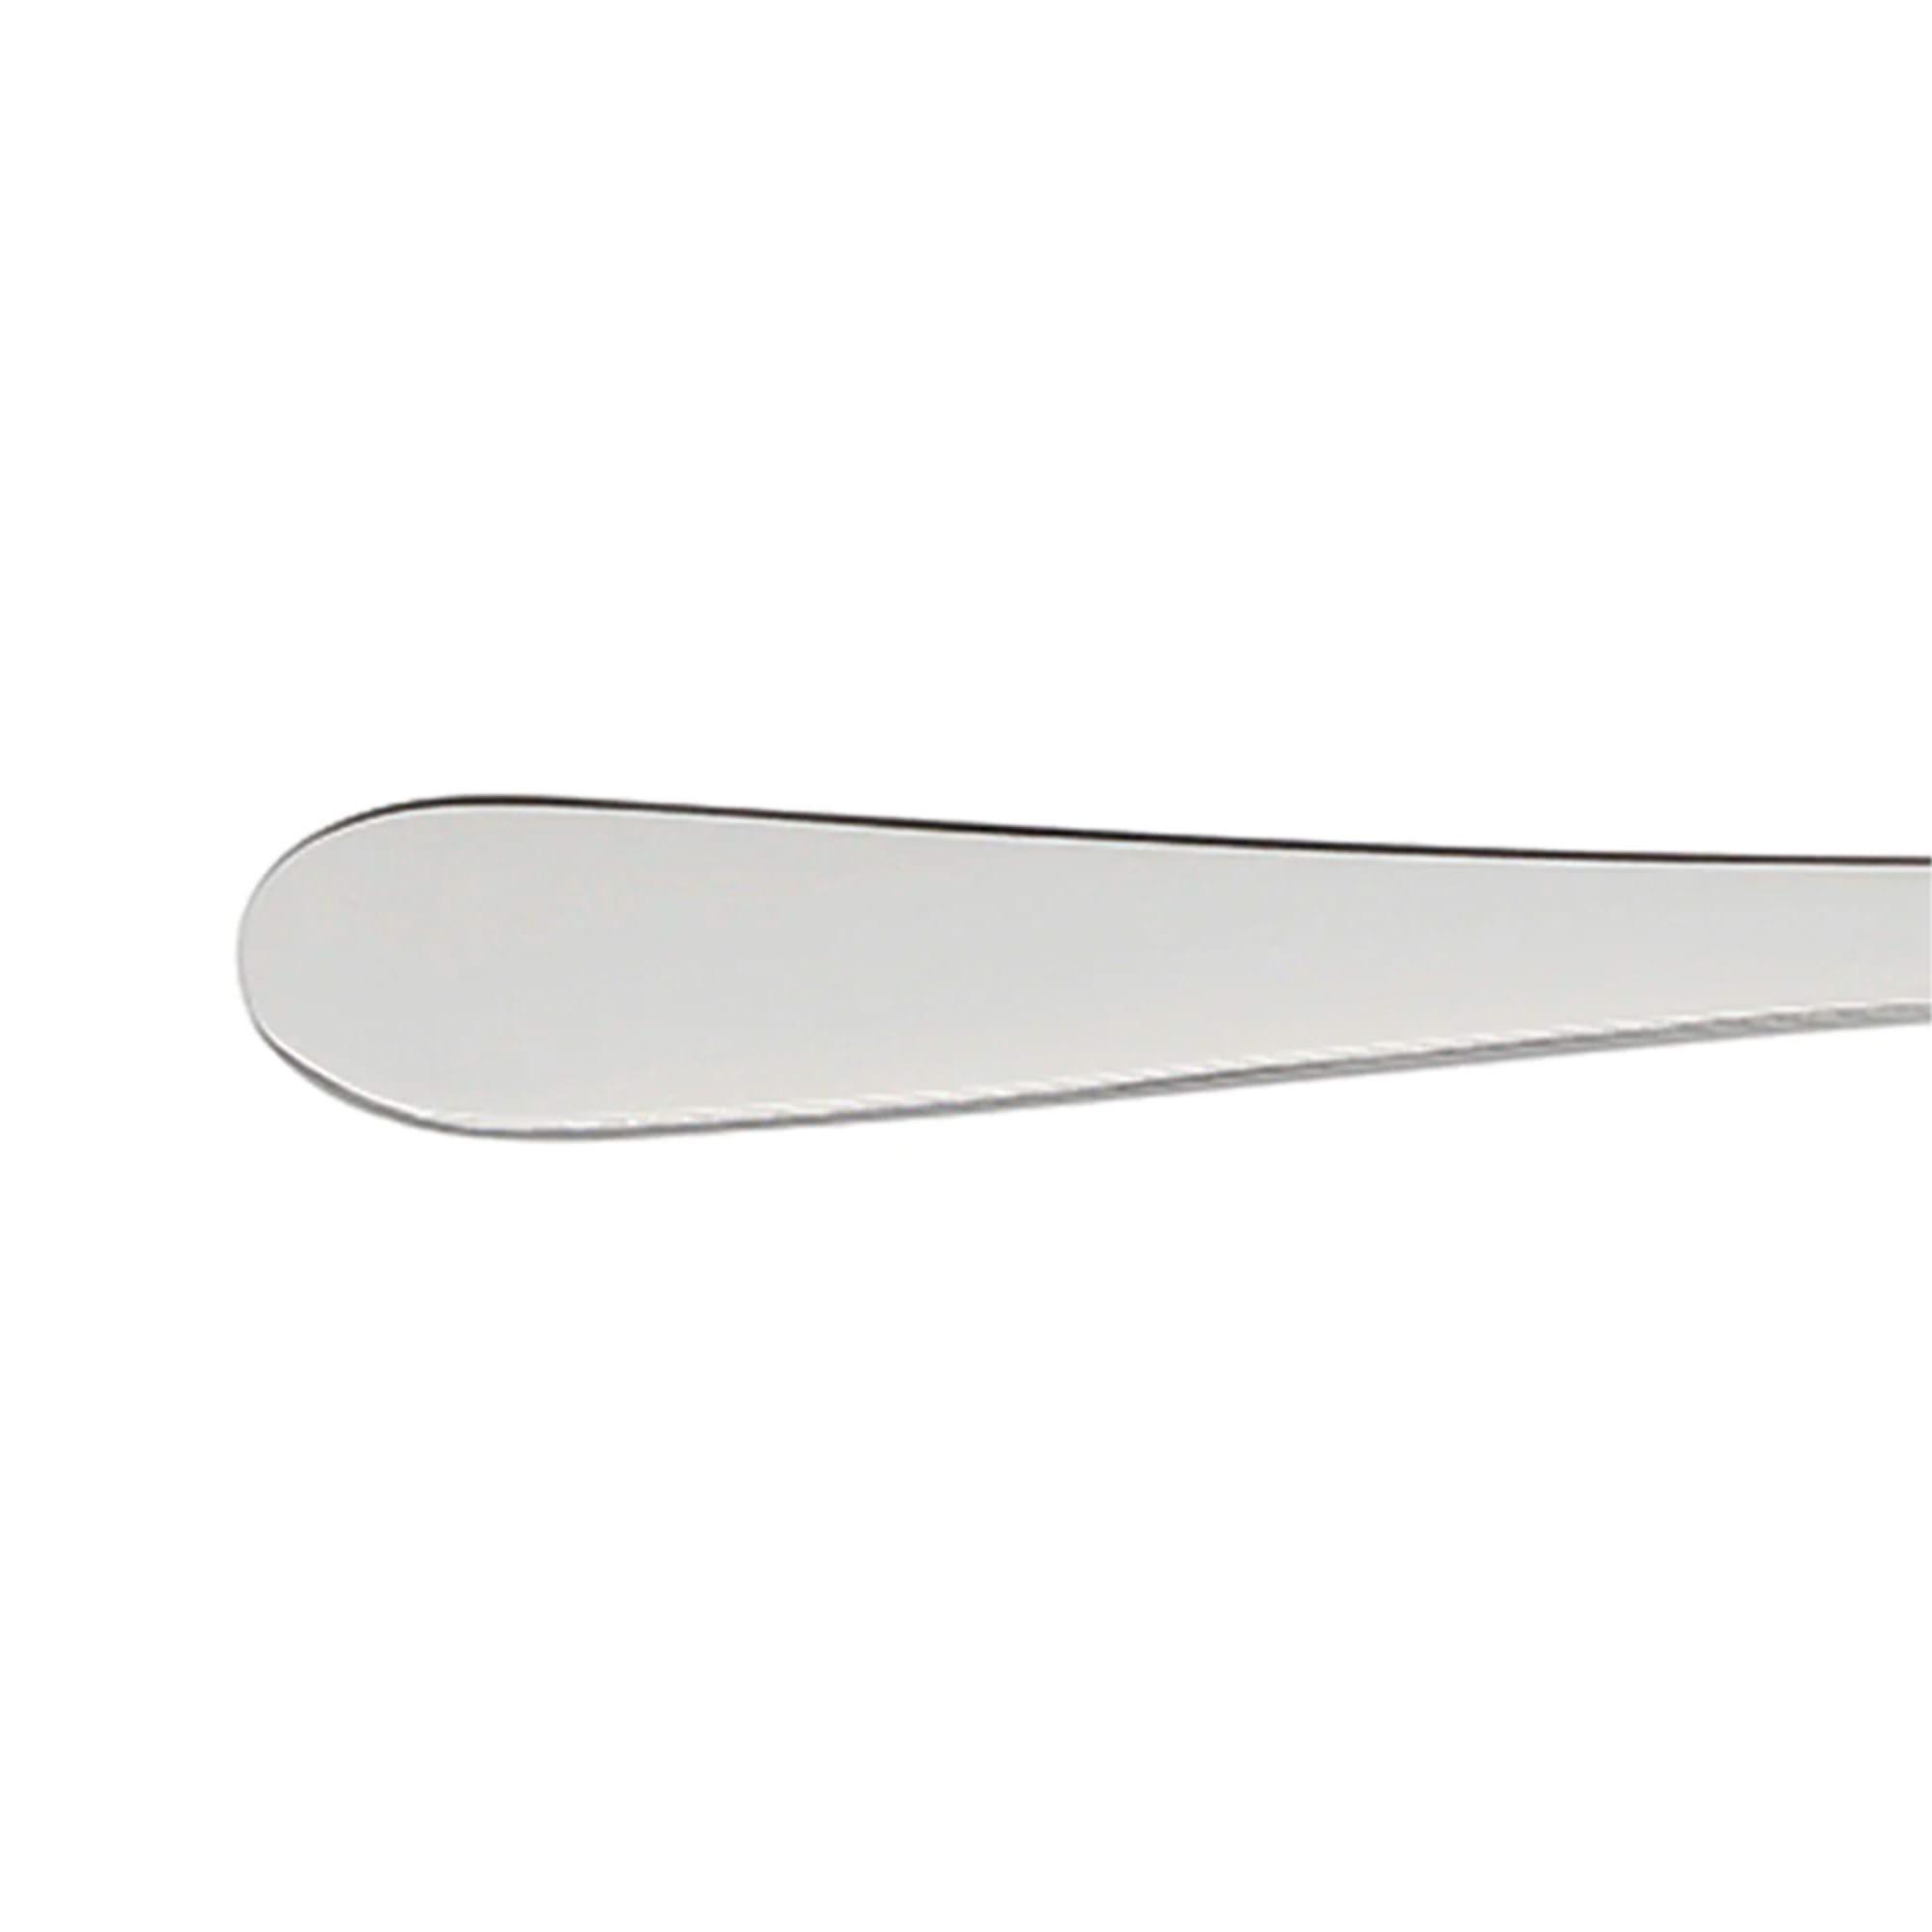 Stanley Rogers Albany Cake Server Image 4